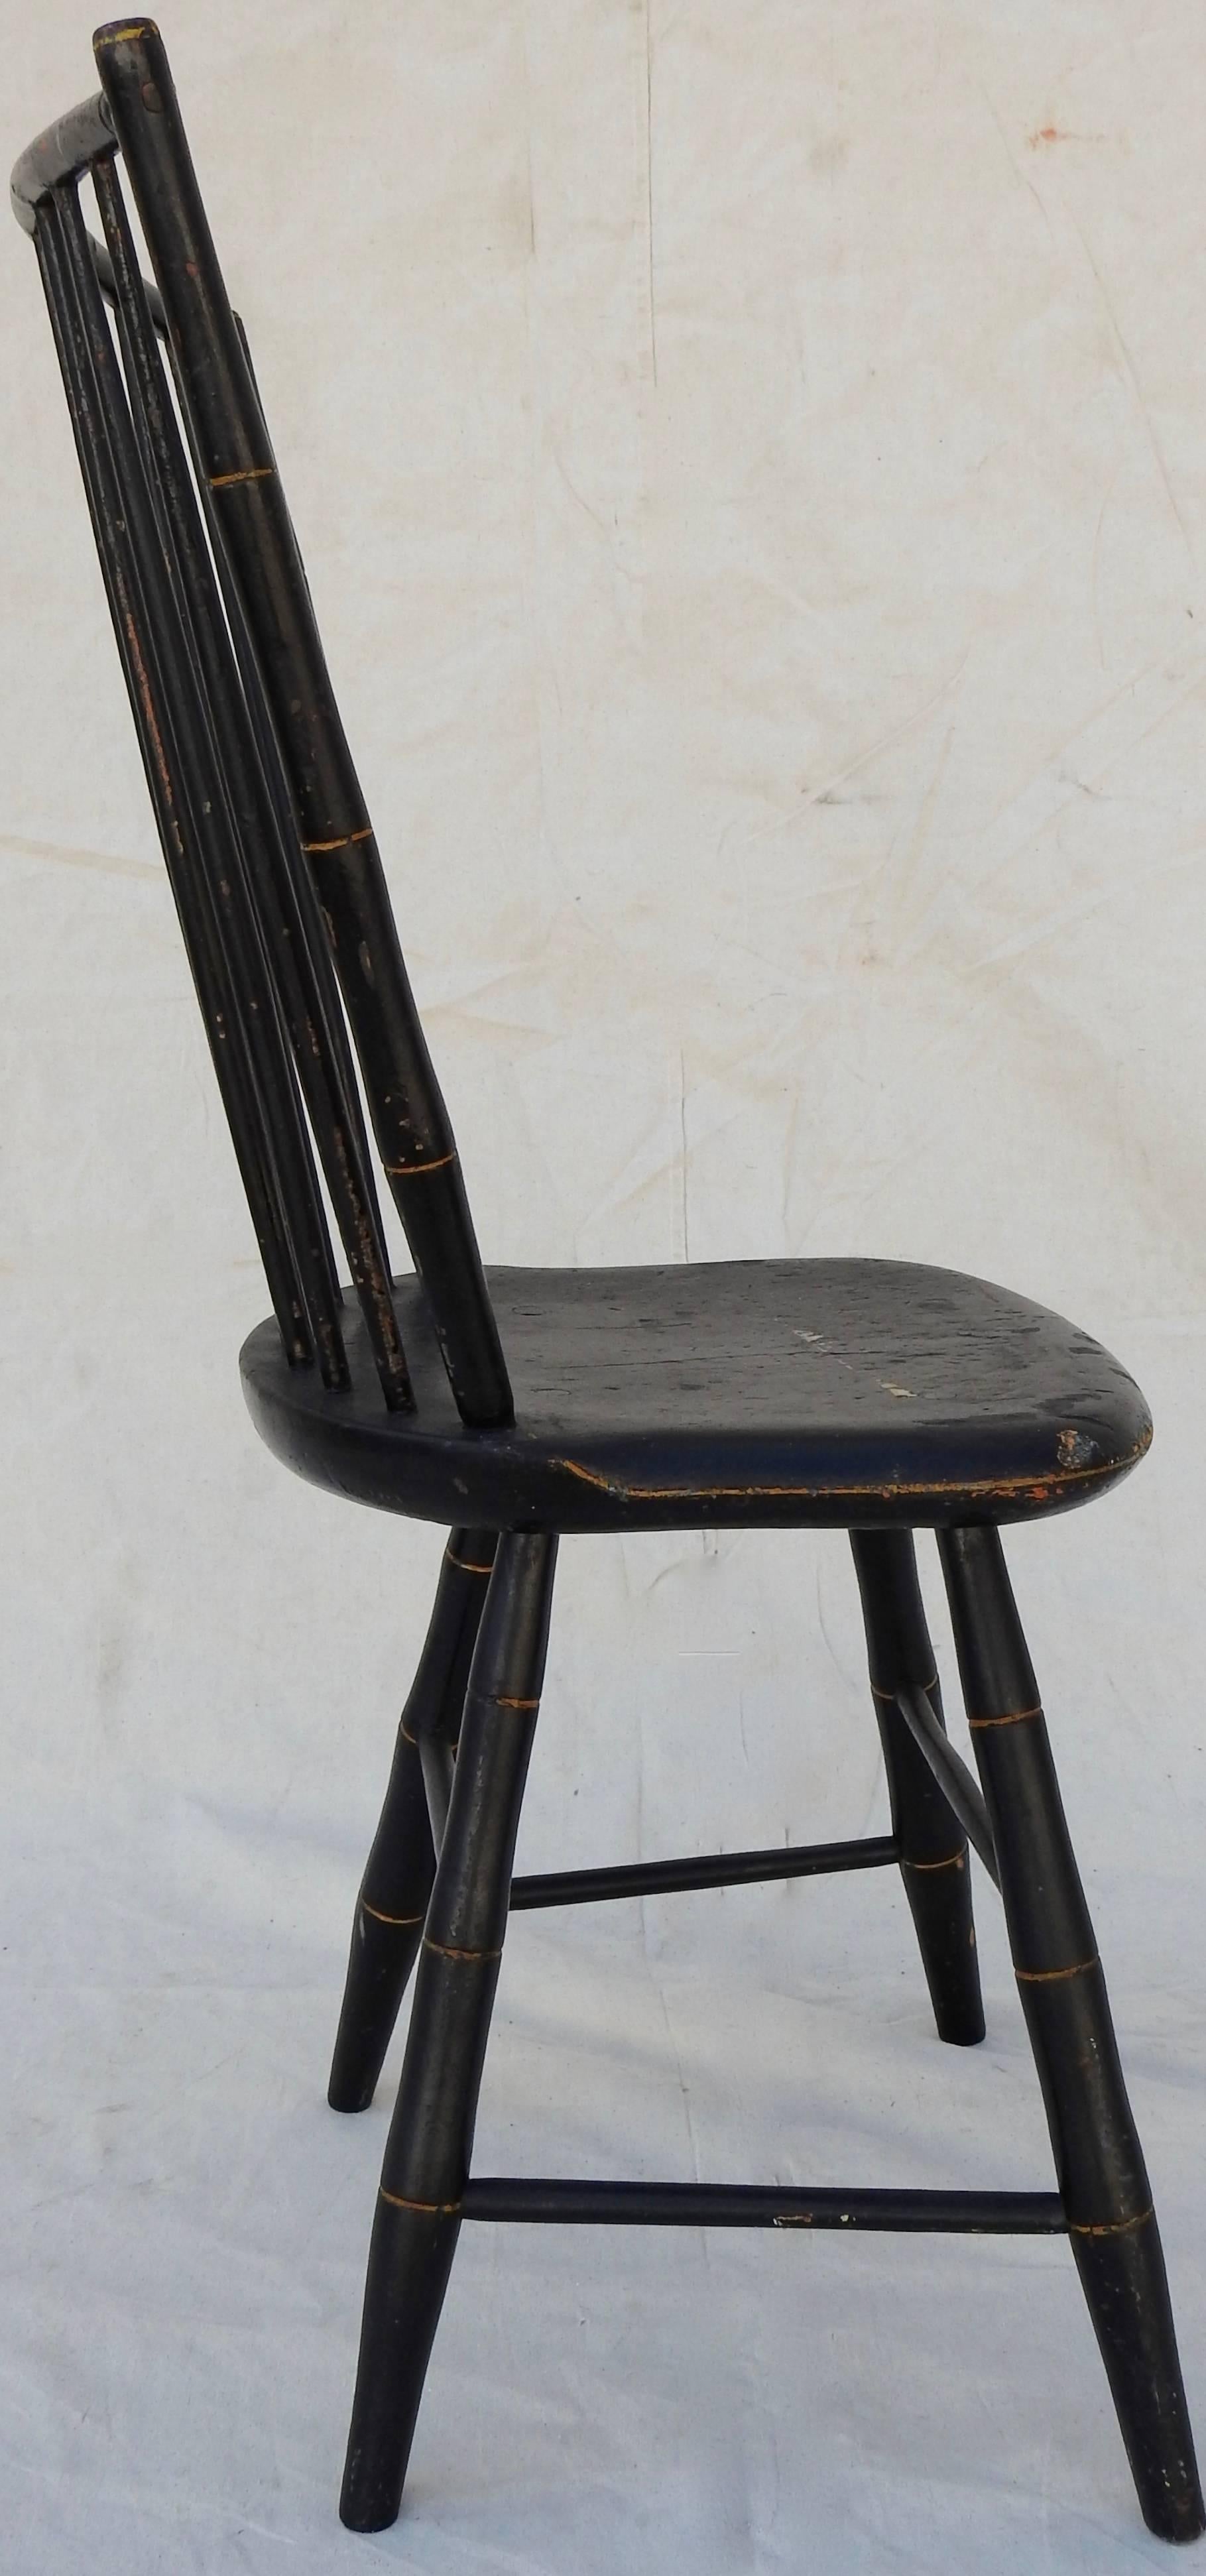 Wood Windsor Chair Black and Gold Painted by William Wilt